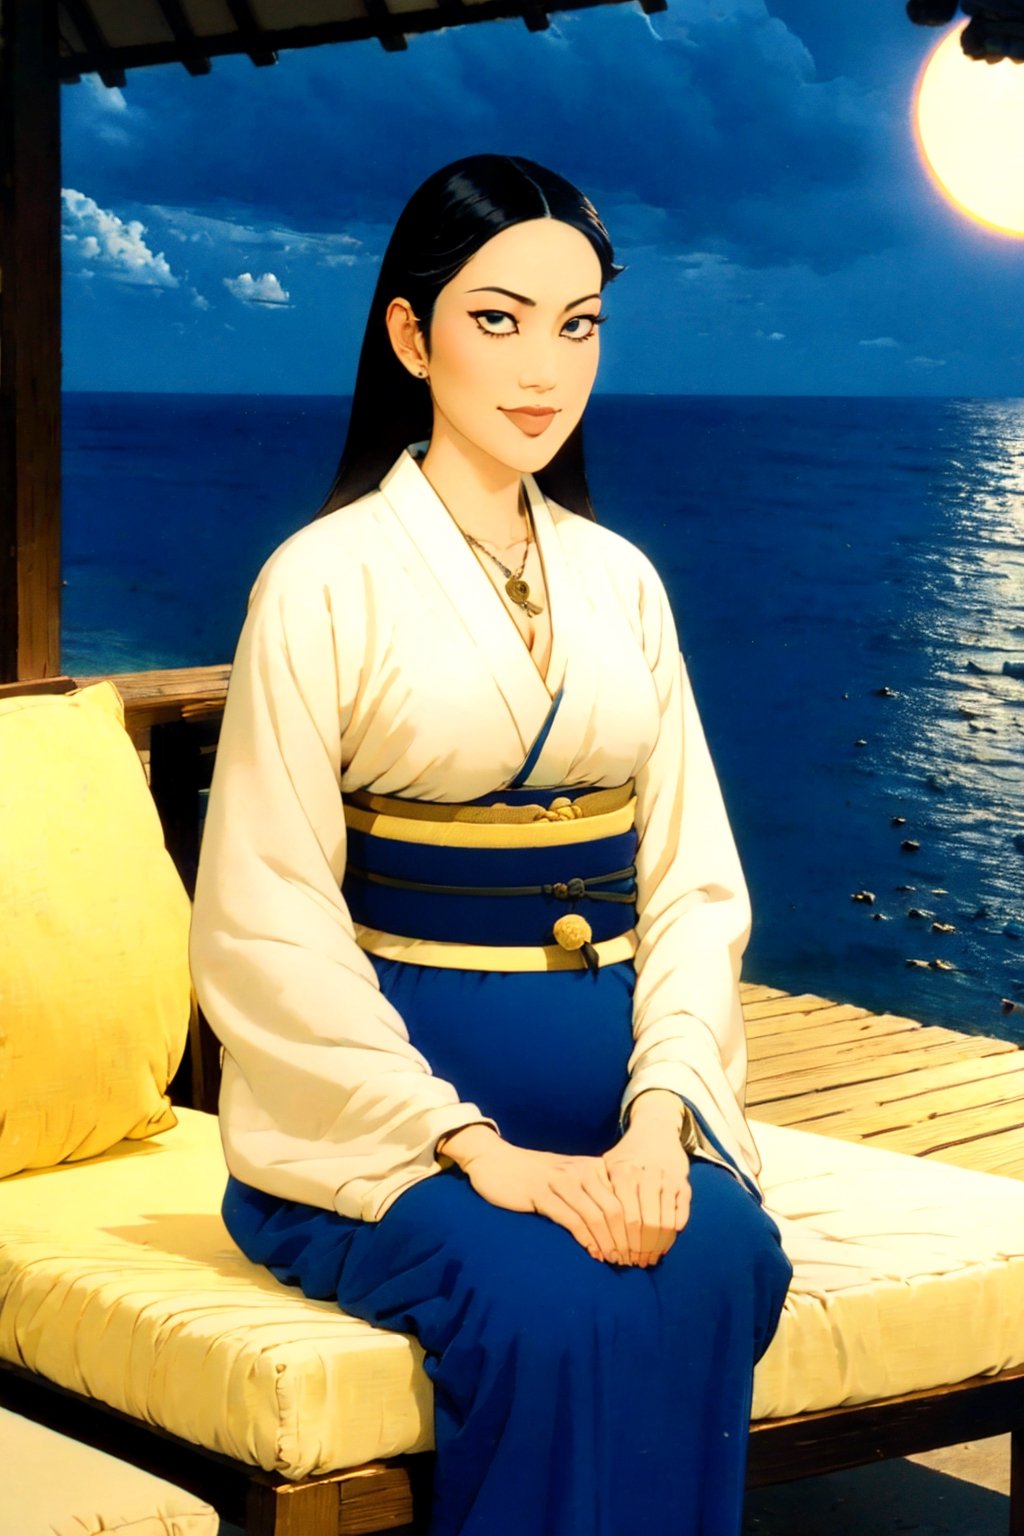 woman\(unohana retsu, mature body, perfect body, black hair, blue eye color, jewelery, bridal gauntlets, rings, amulets, eyelashes, large breasts, large cleavage, pregnant, wearing yukata, sandal, feminine, beautiful, mistress\) The scene should convey a seductive and arrogant smug expression on her face, with an air of arrogance as she maintains eye contact with the viewer, (full body), sitting, background(outdoor, restaurant, ocean, pillows, sky, day, sun, table(sake), pots with flowers),(masterpiece, highres, high quality:1.2), ambient occlusion, low saturation, High detailed, Detailedface